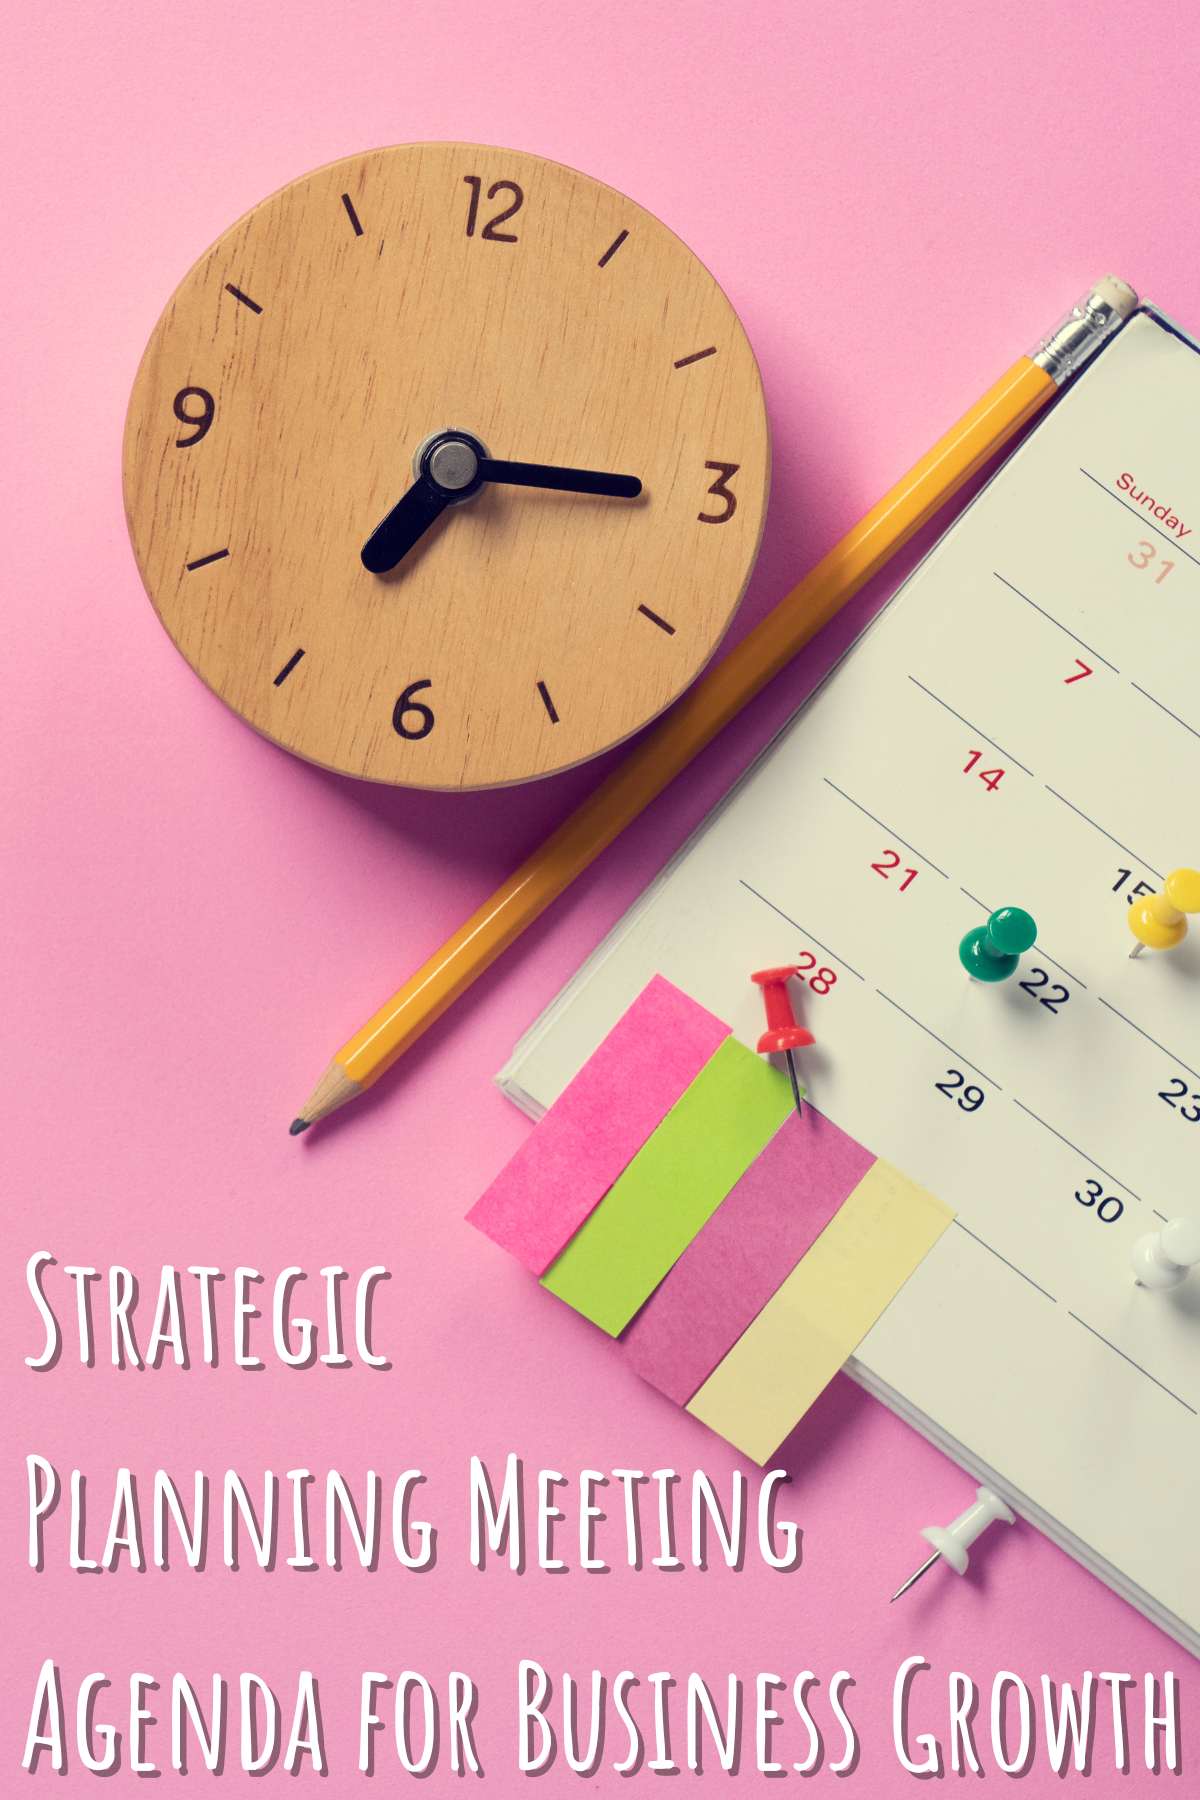 Strategic Planning meeting agenda for business growth. Photo of pink background with calander planner